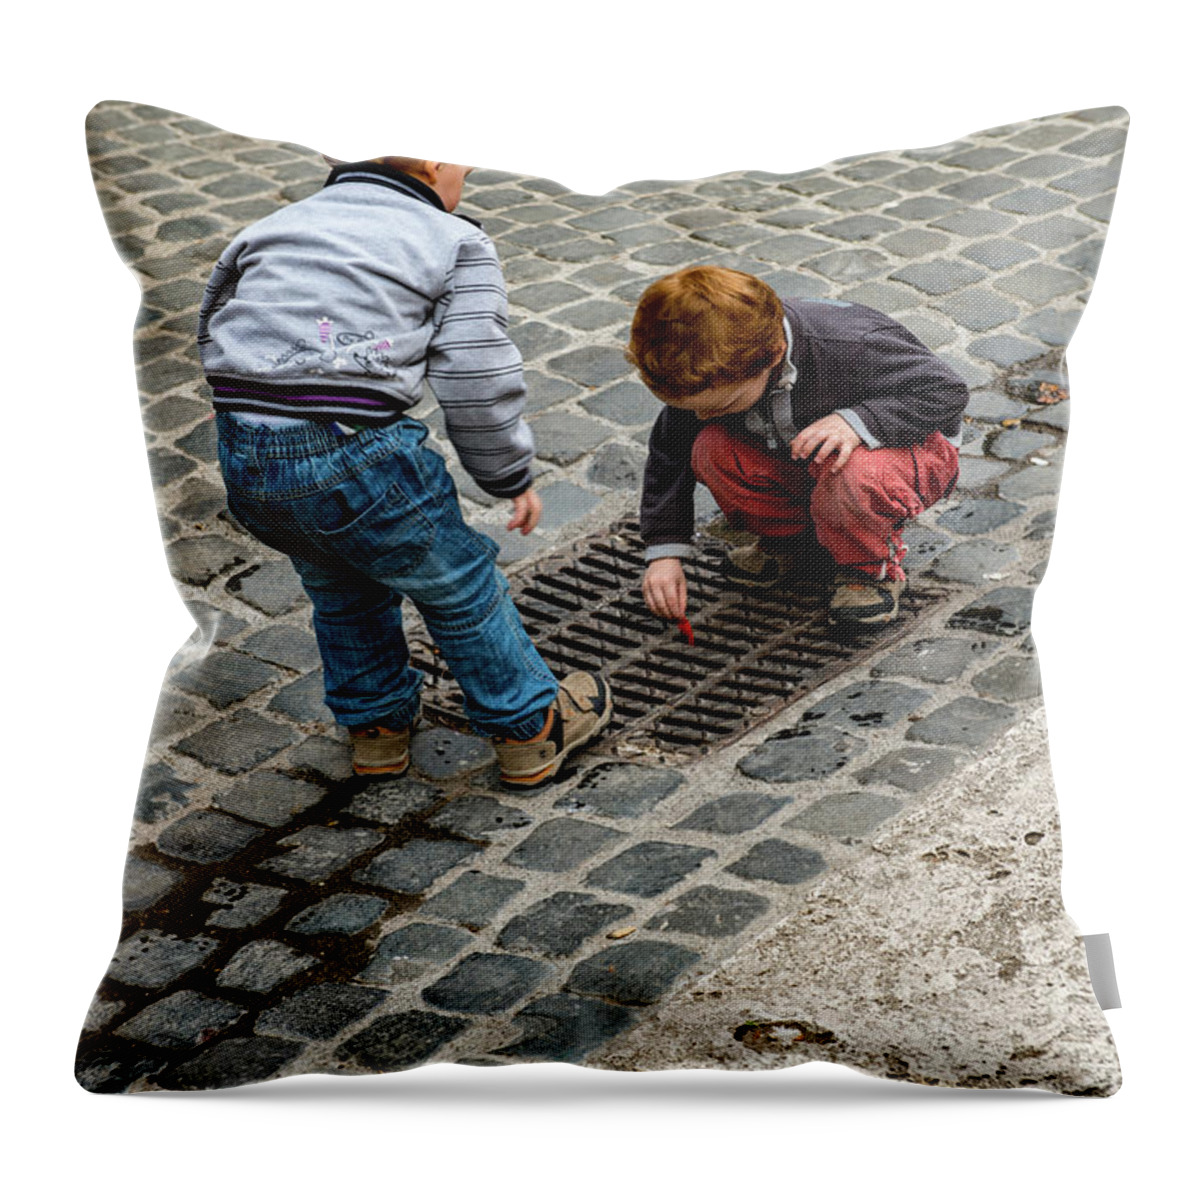 Italia Throw Pillow featuring the photograph Piazza Testaccio by Joseph Yarbrough